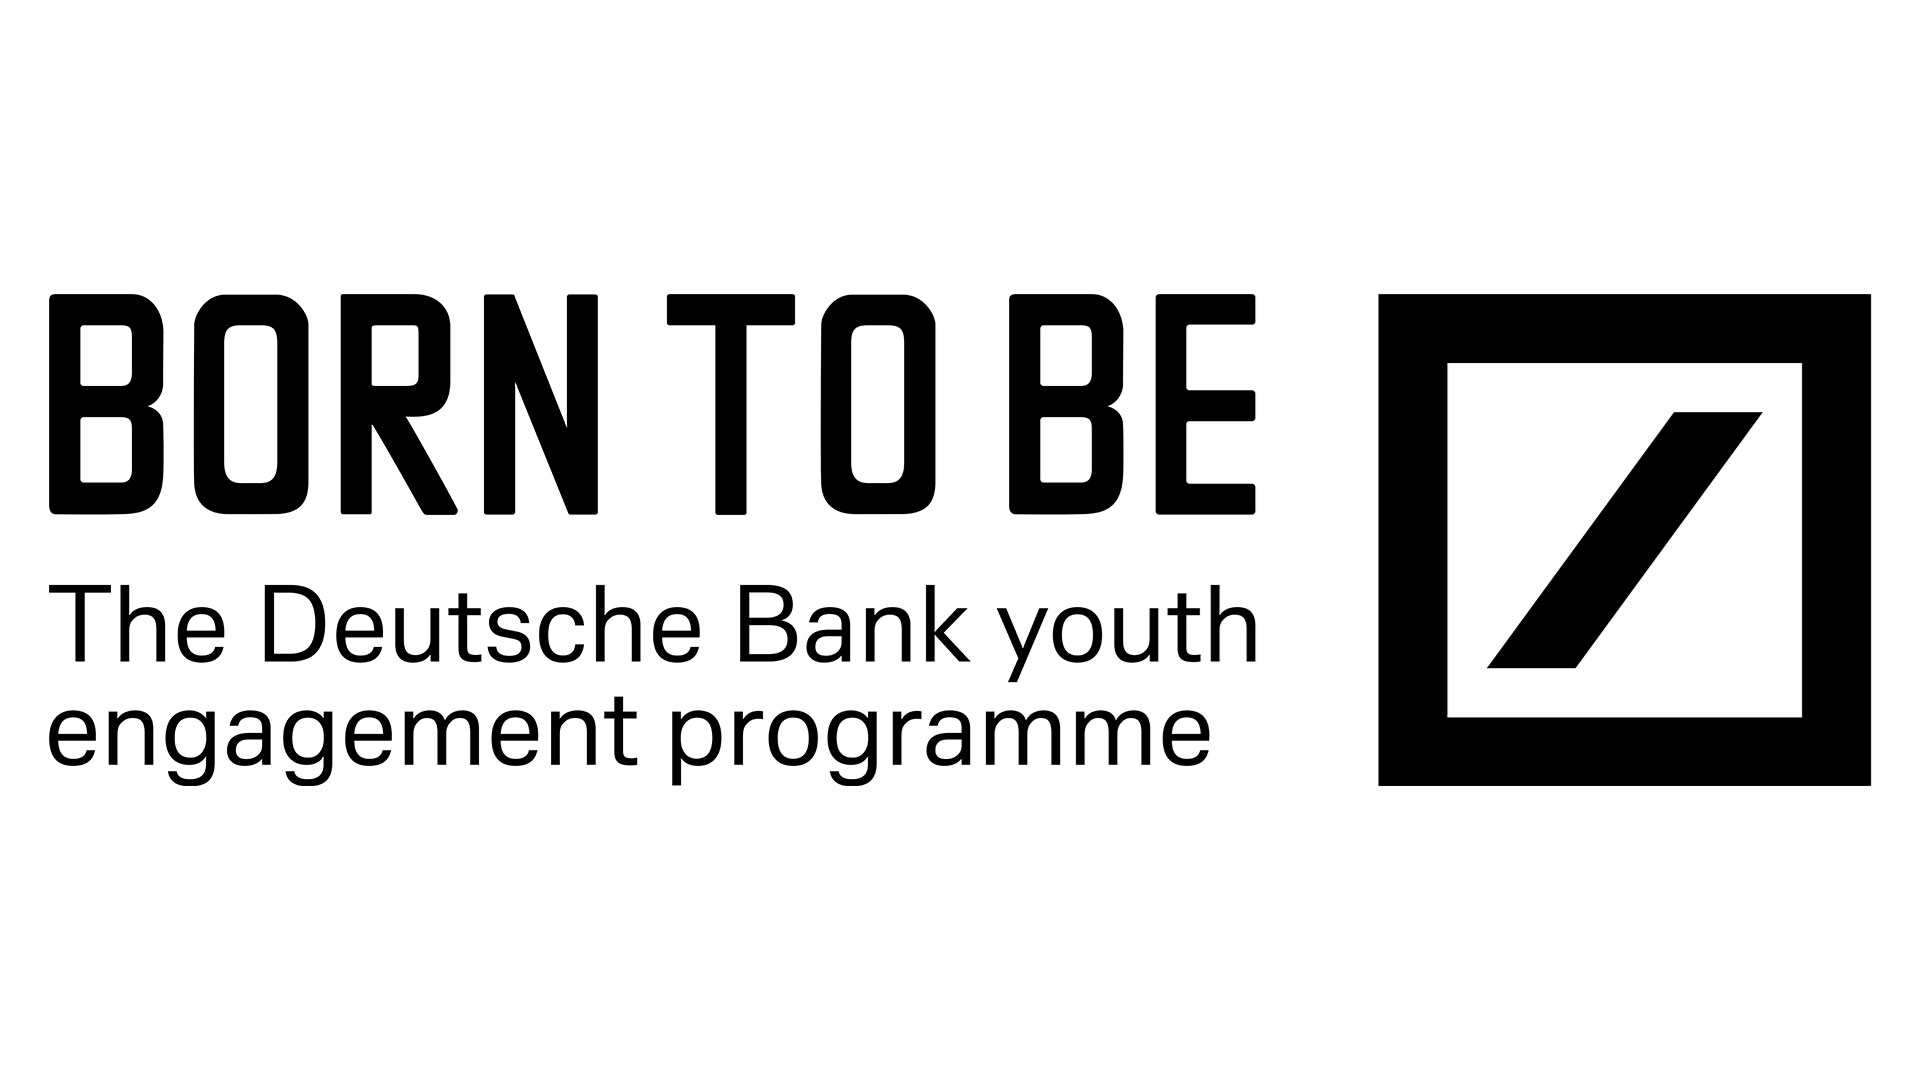 Deutsche Bank logo sits on the right hand side. On the left it says, born to be, the deutsche bank youth engagement programme.